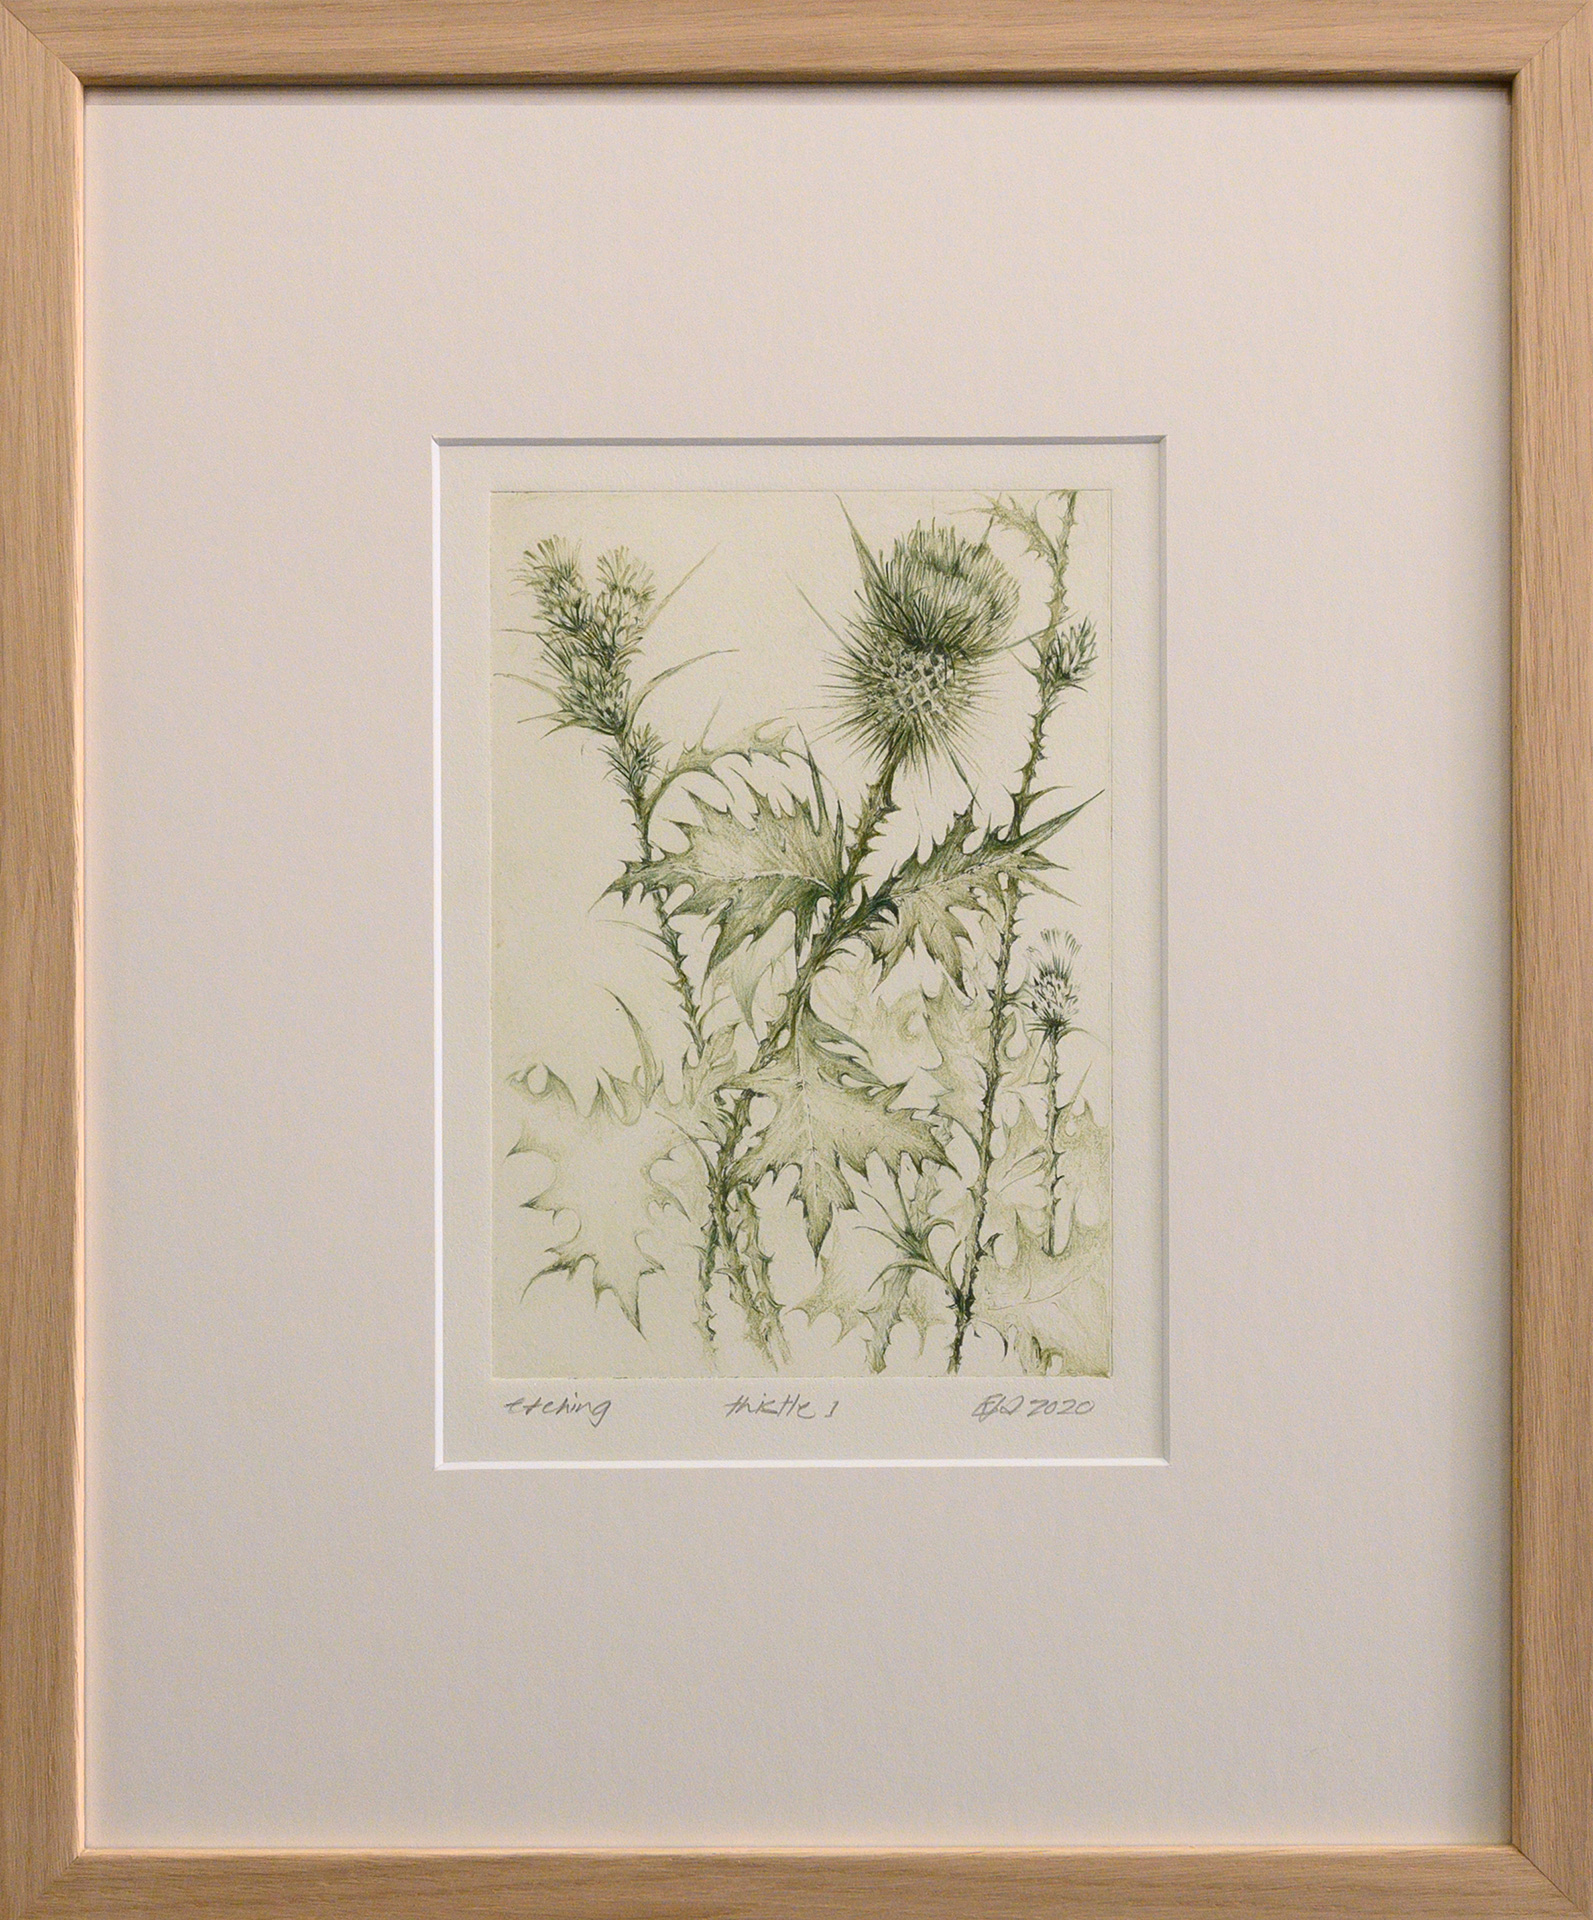 Framed artwork by Libby Altschwager of a bottle green image of a Scotch Thistle